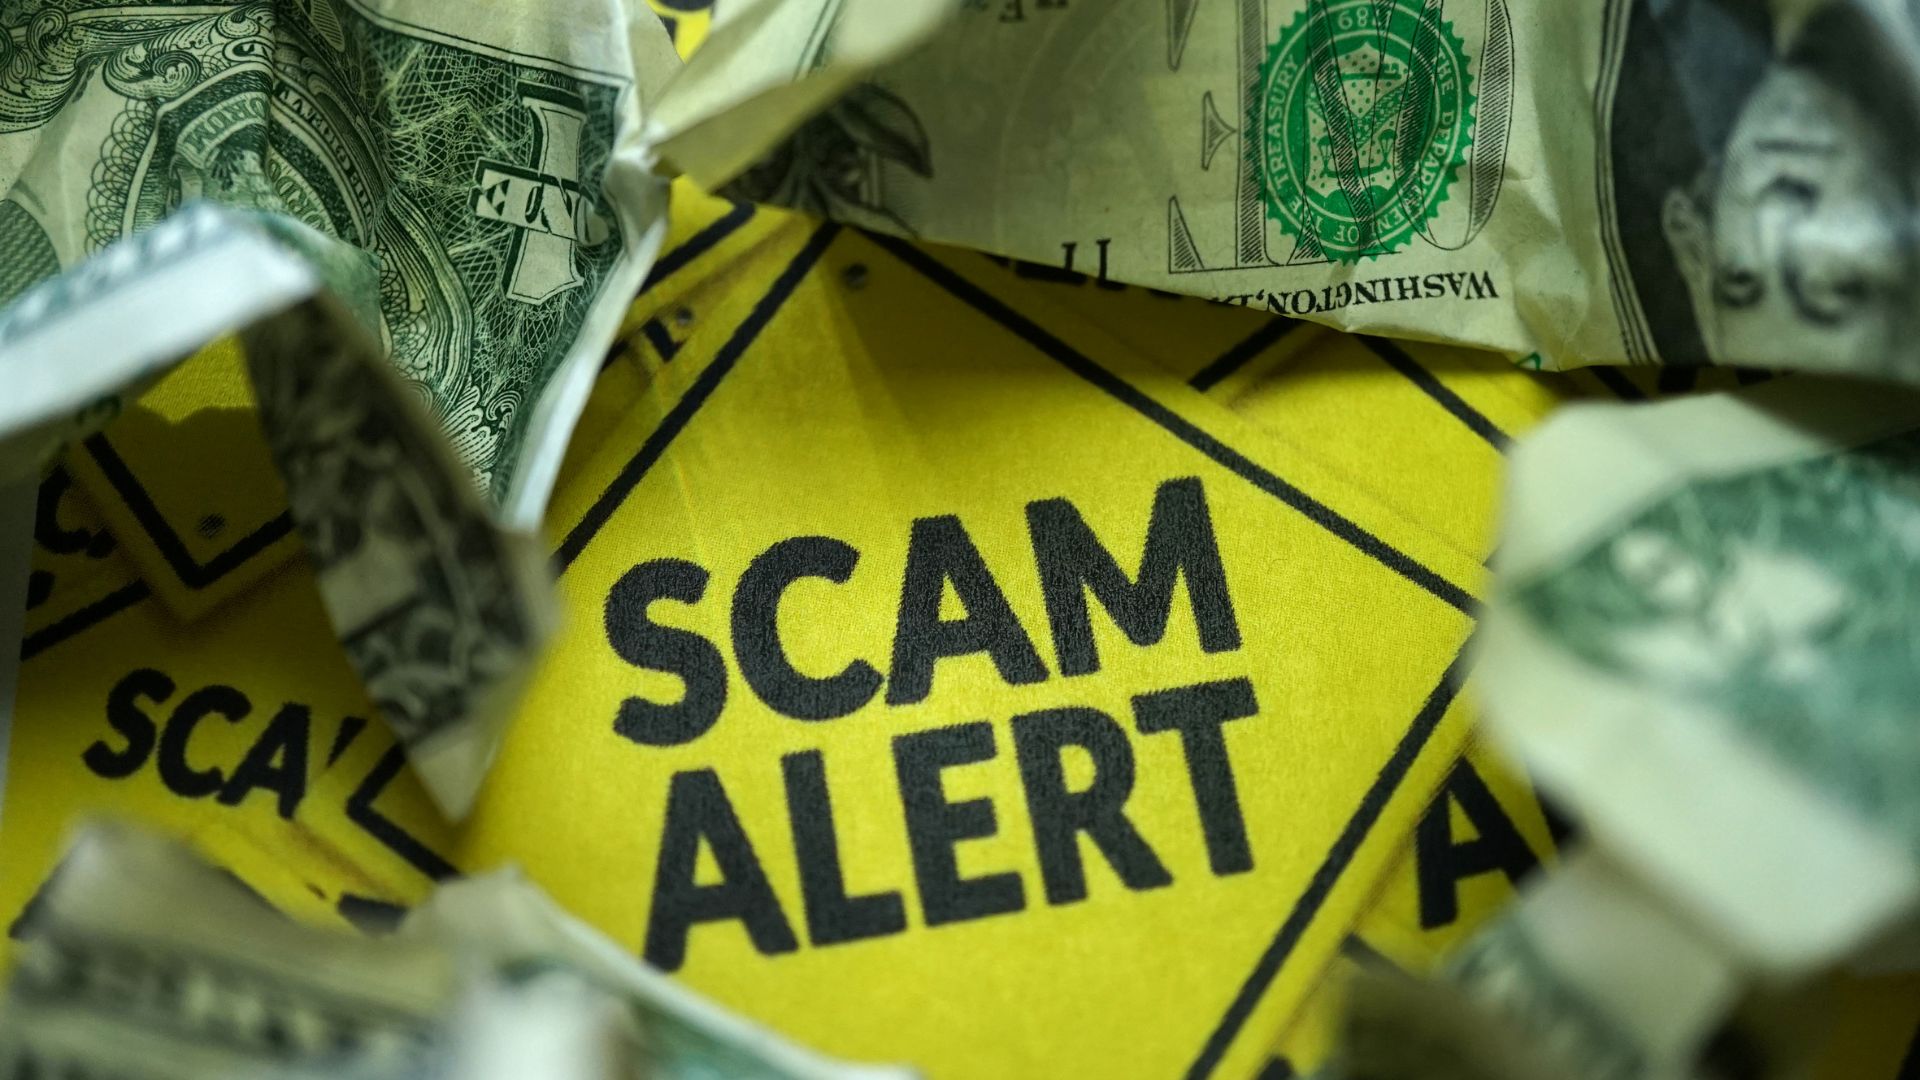 3 Ways Your Life Insurance Company Is Scamming You